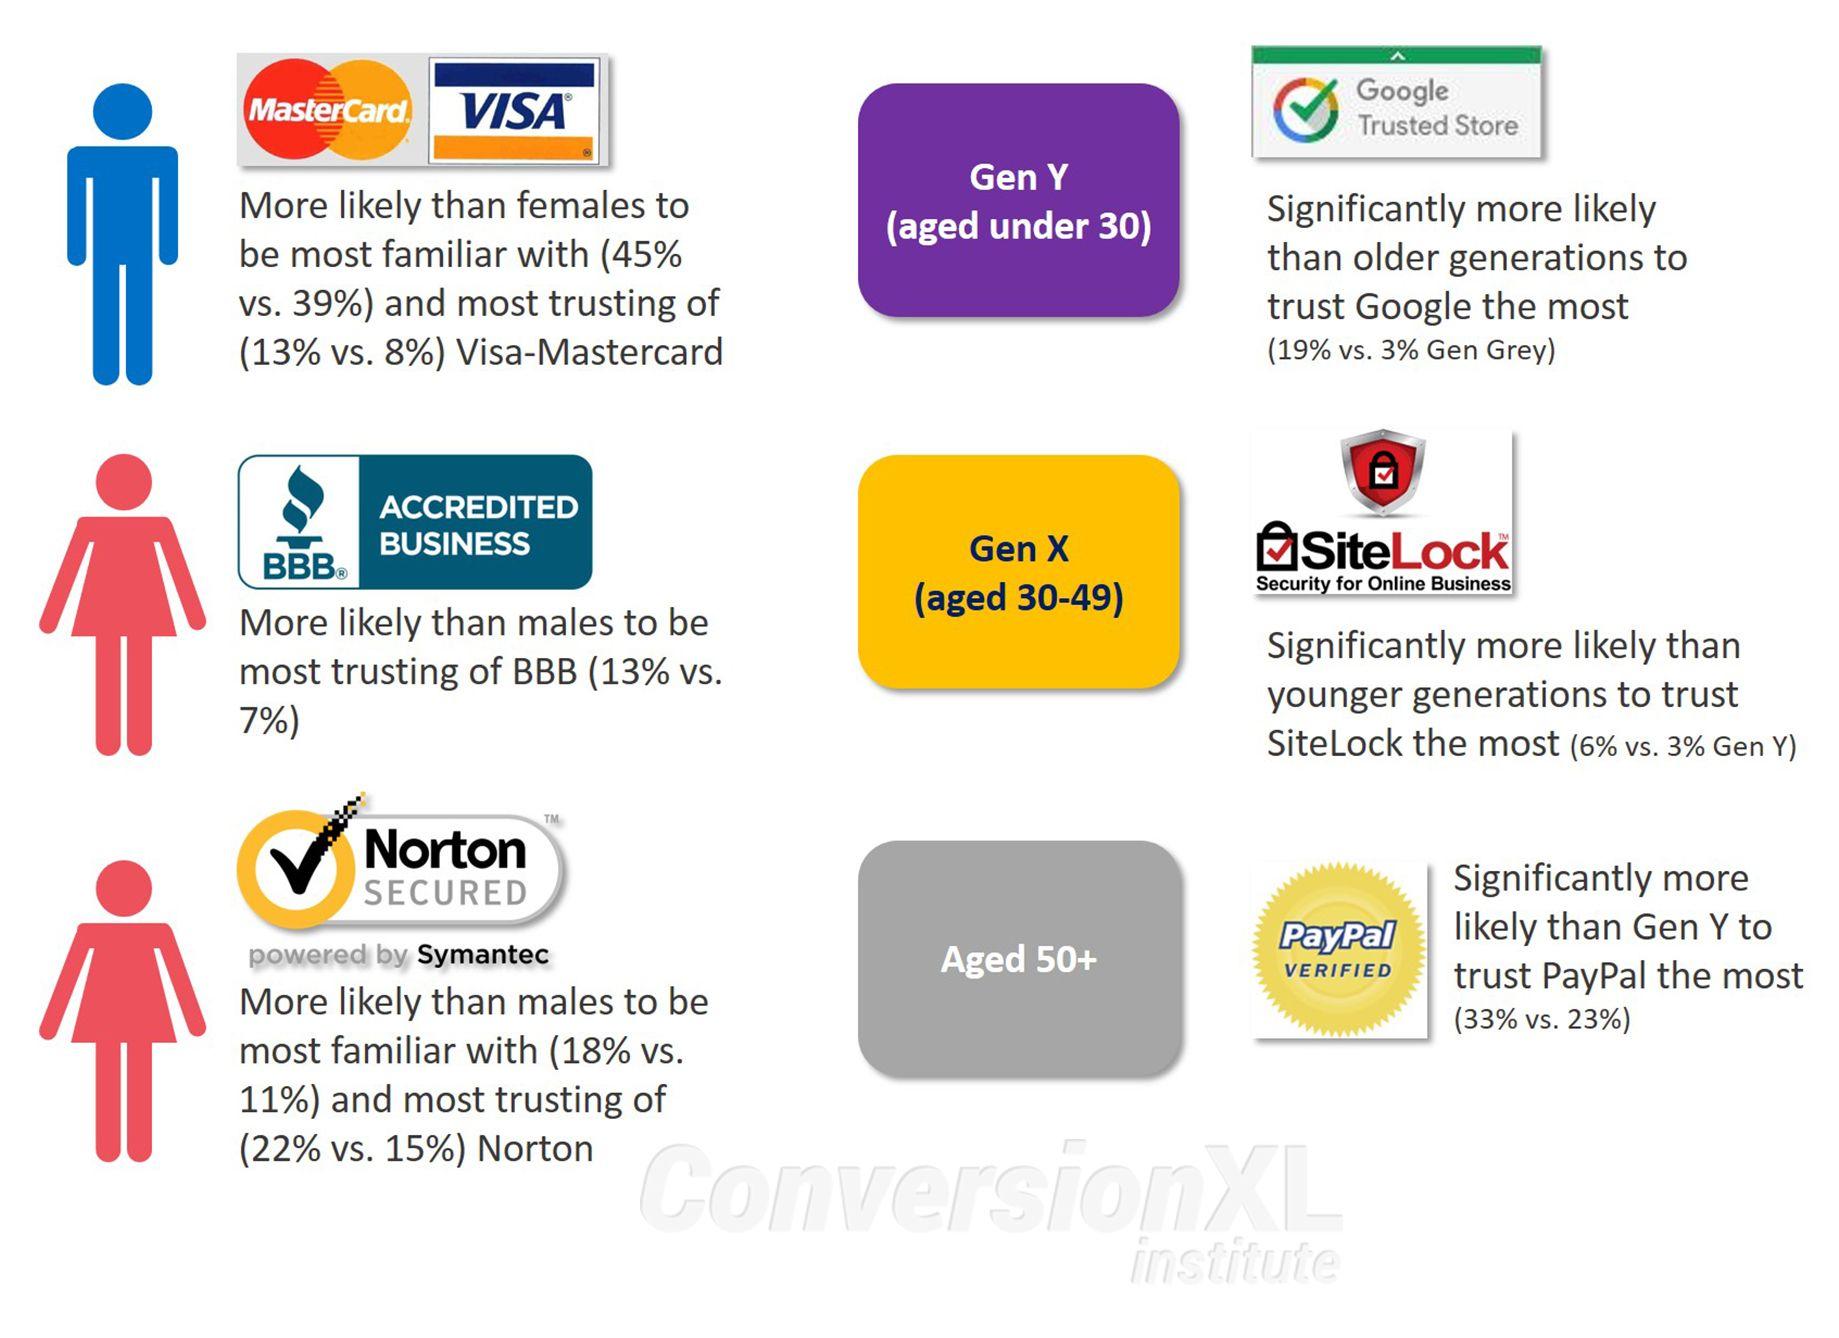 PayPal Verified Visa MasterCard Logo - Which Site Seals Create The Most Trust? [Original Research]